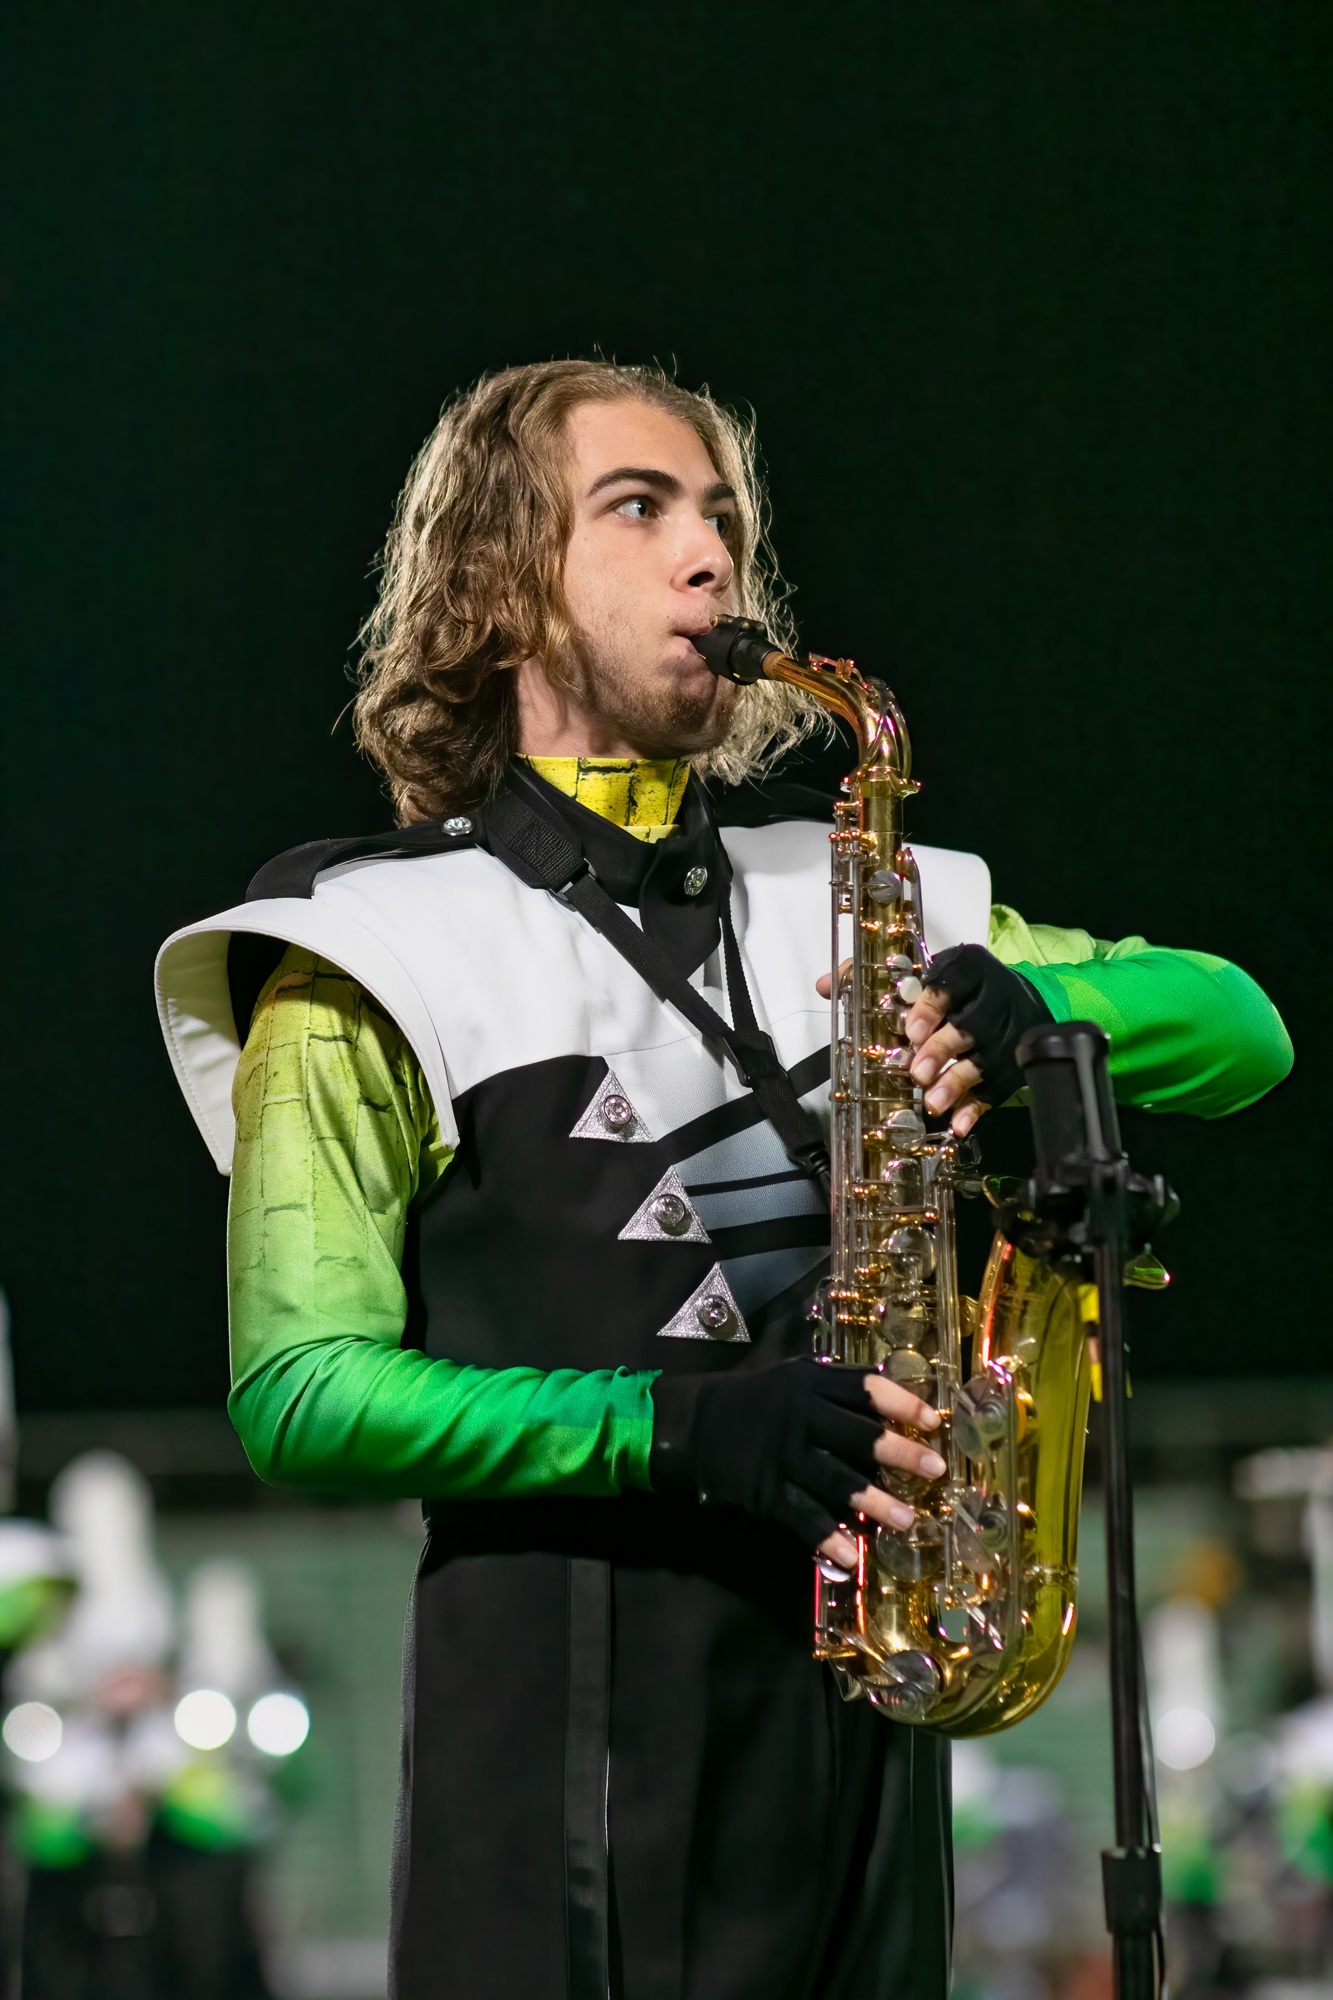 Ahmad Alhallaq concentrates on his performance with the Lakewood Ranch High School Marching Mustangs. Courtesy photo.